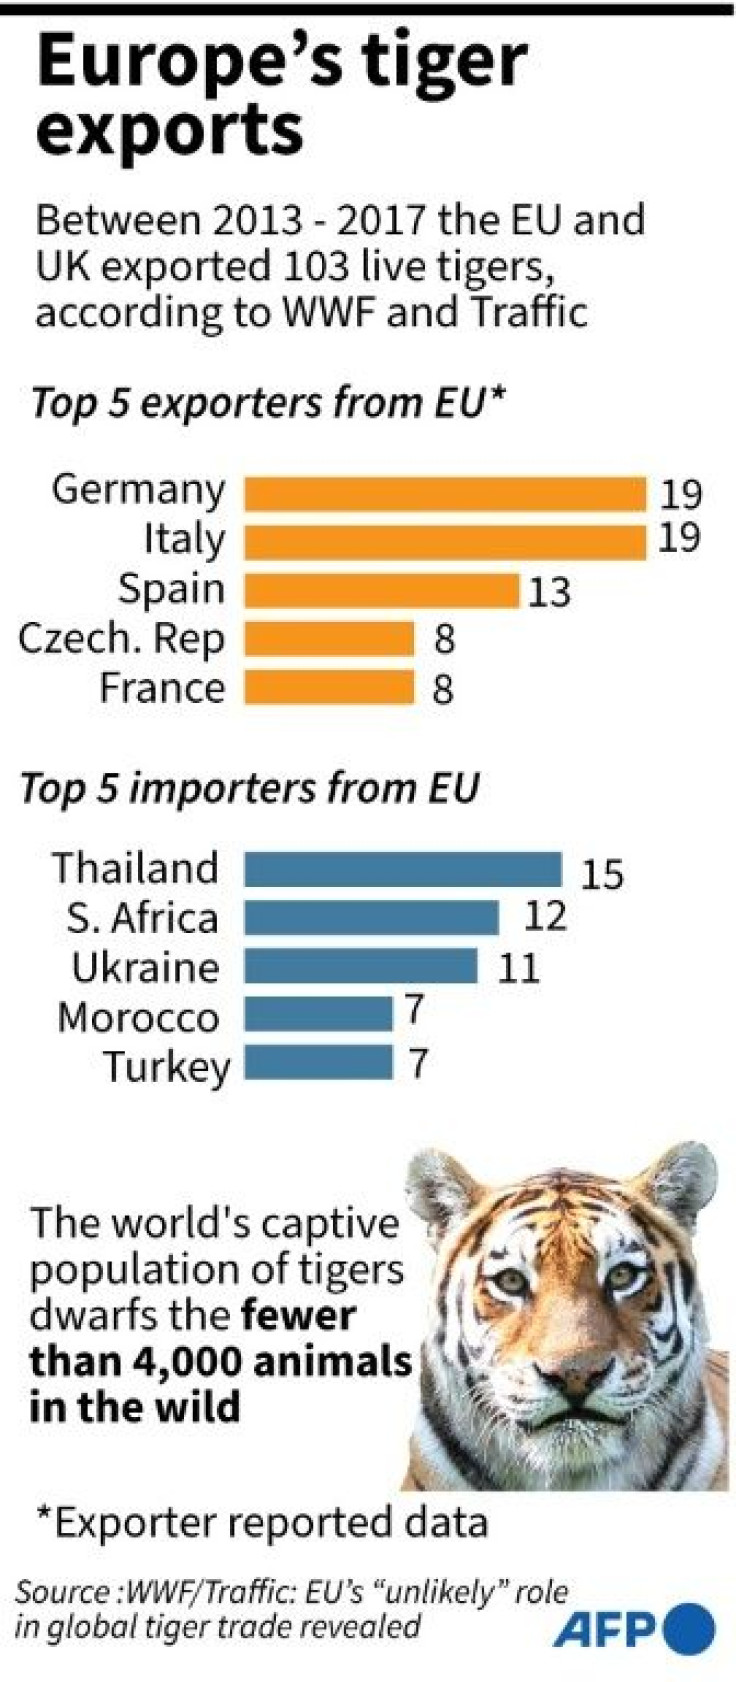 Chart showing documented tiger exports from European countries 2013 - 2017, according to data published by WWF and Traffic.